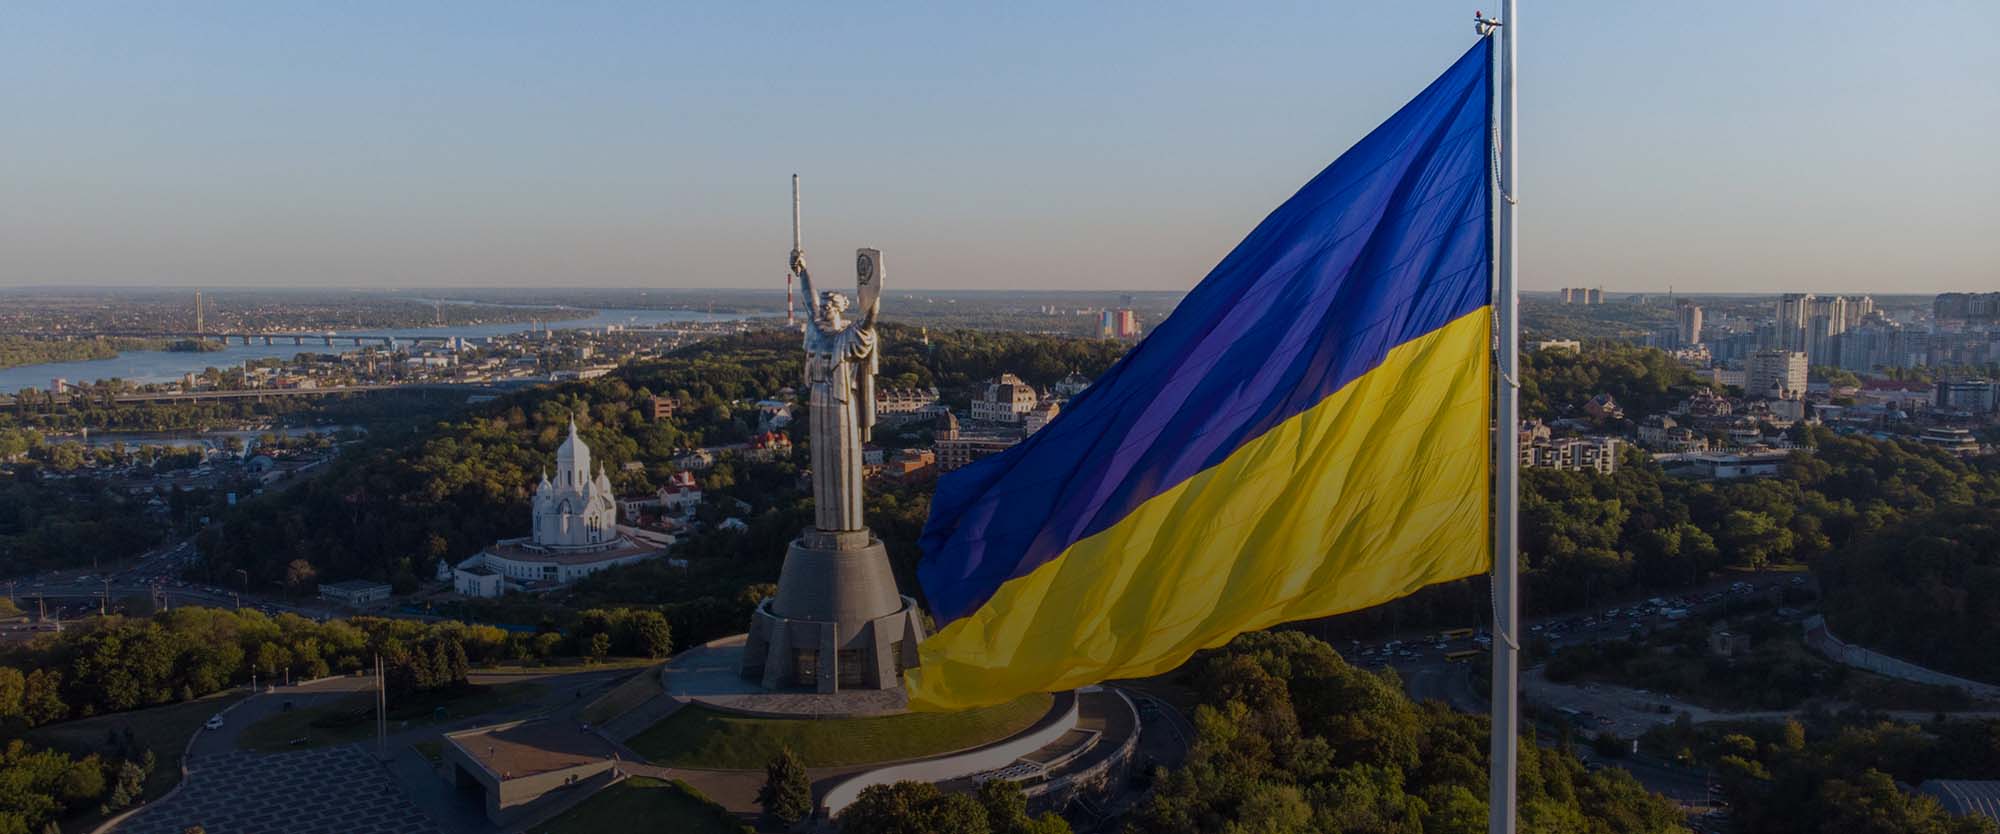 Ukraine flag in front of Motherland Monument